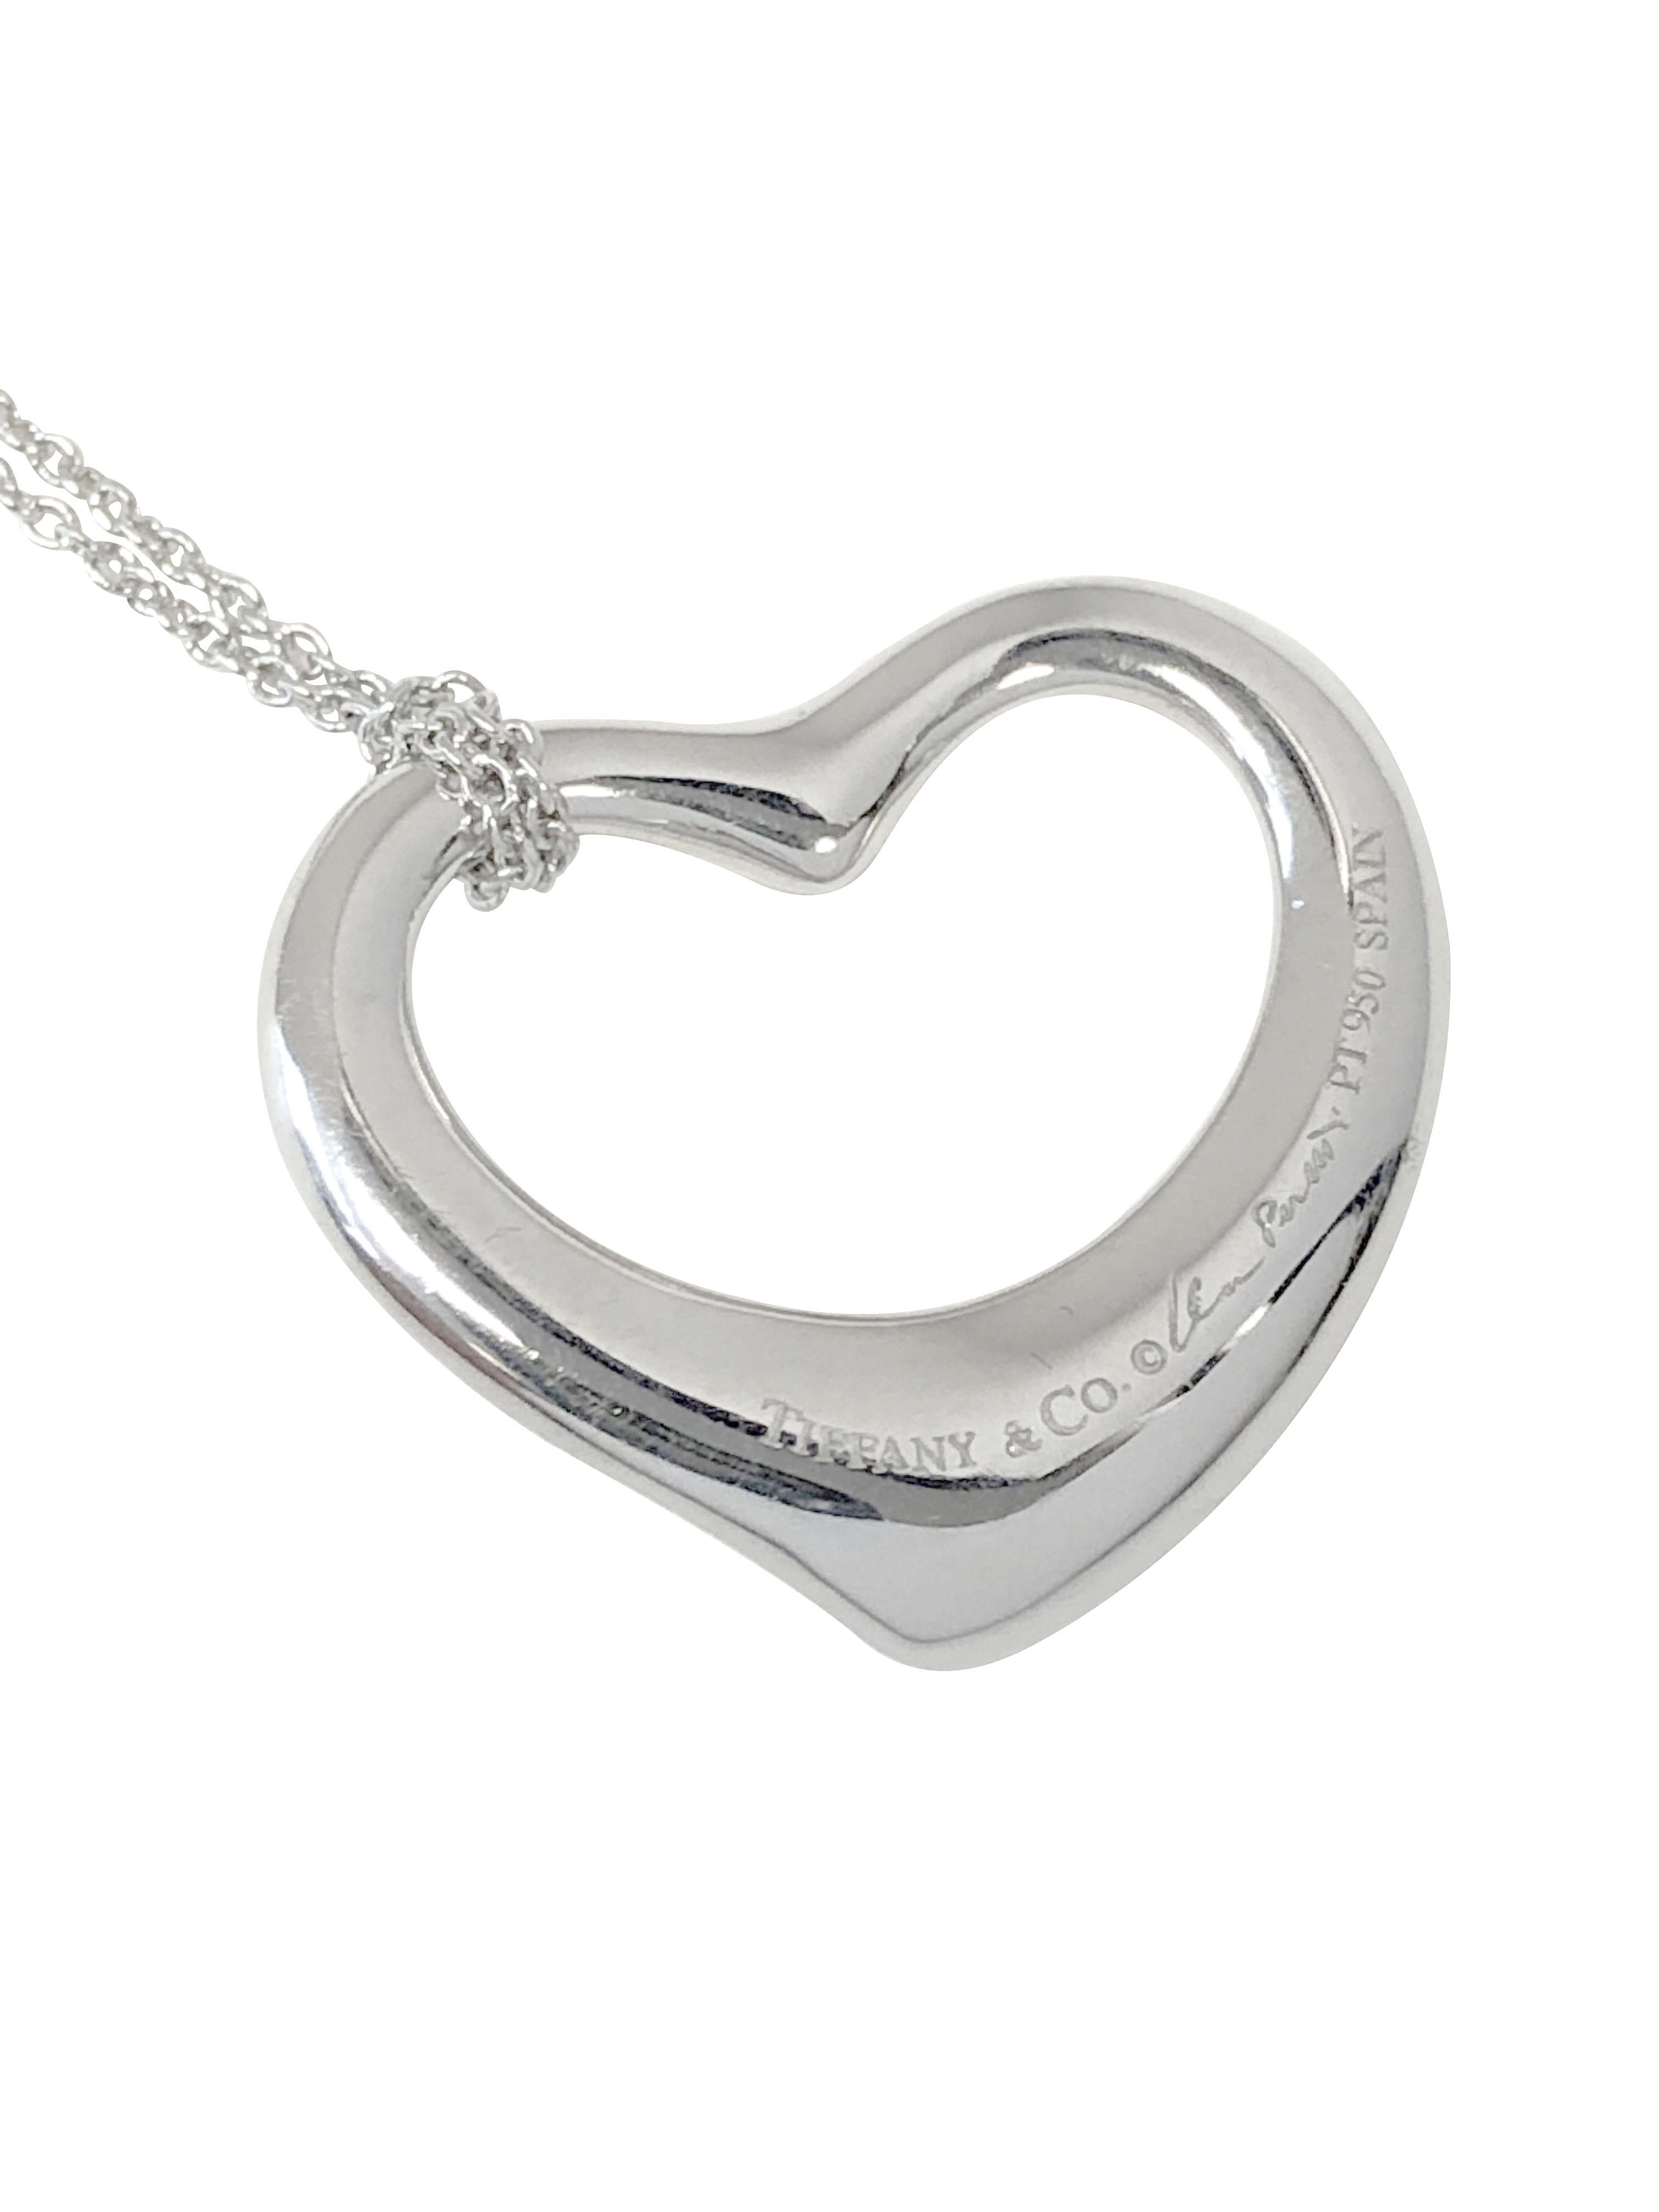 Circa 2000 Elsa Peretti for Tiffany & Company Platinum Floating Heart pendant, measuring 7/8 X 3/4 inch and is set with Diamonds totaling .15 Carat, suspended from a 16 inch Platinum chain and comes in a Tiffany presentation box.